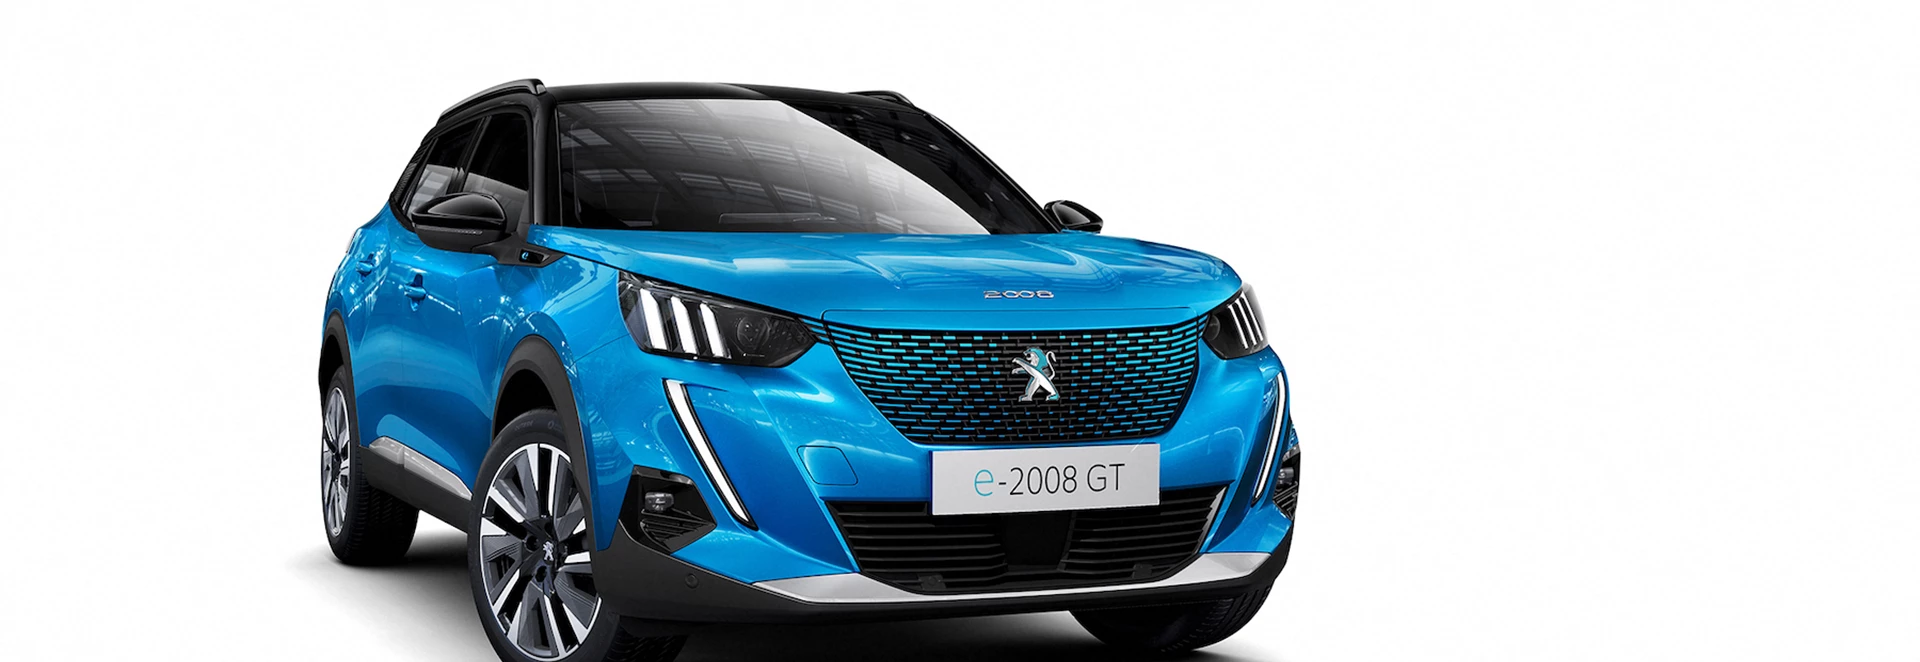 Why you should switch to EV with the upcoming Peugeot e-2008